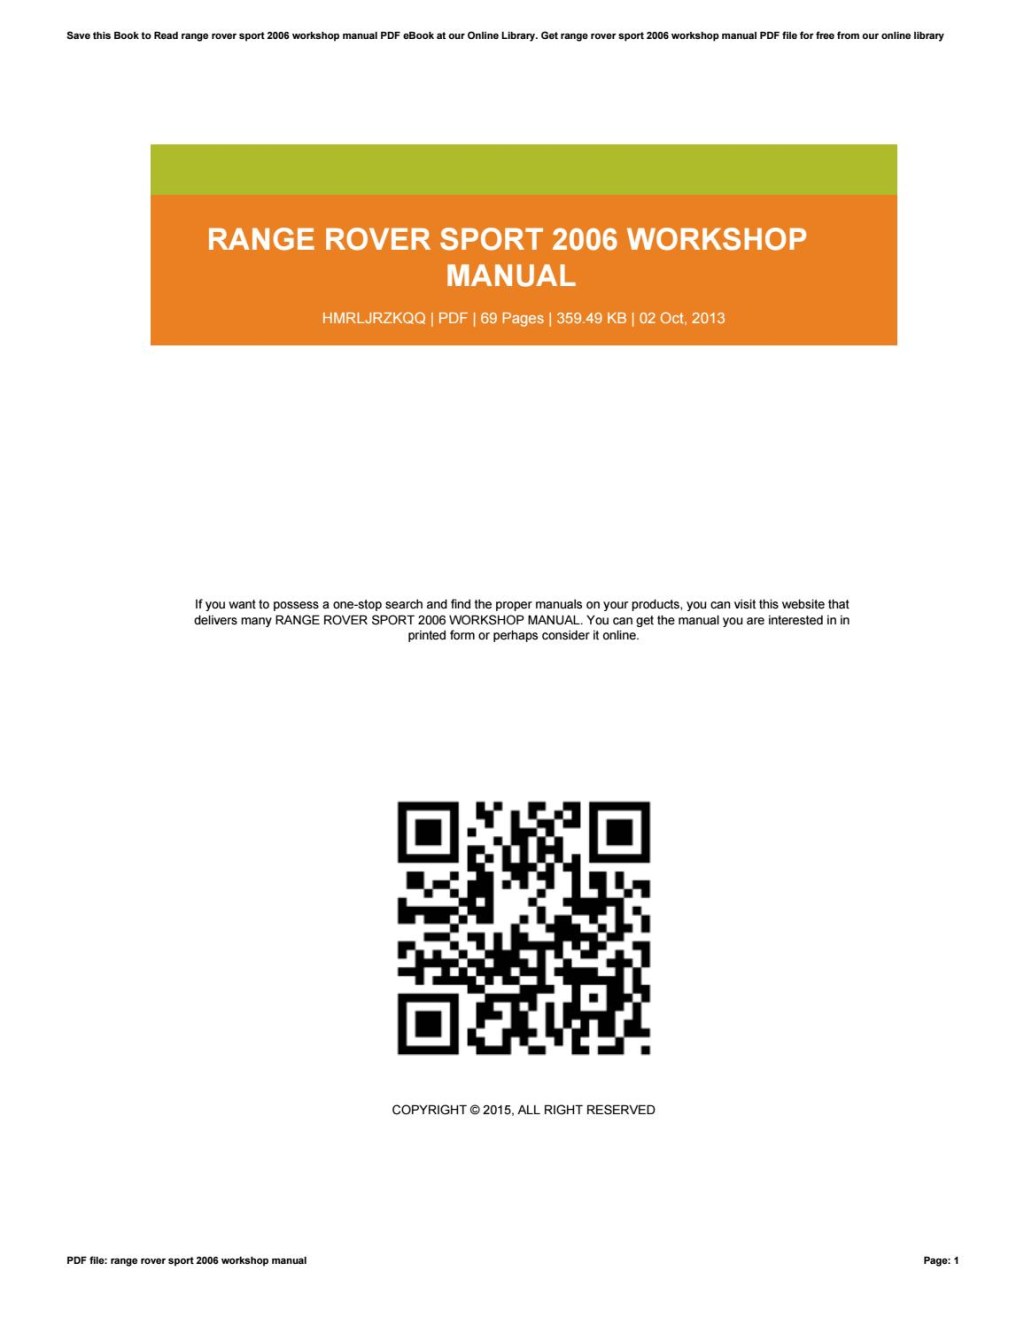 Picture of: Range rover sport  workshop manual by John – Issuu